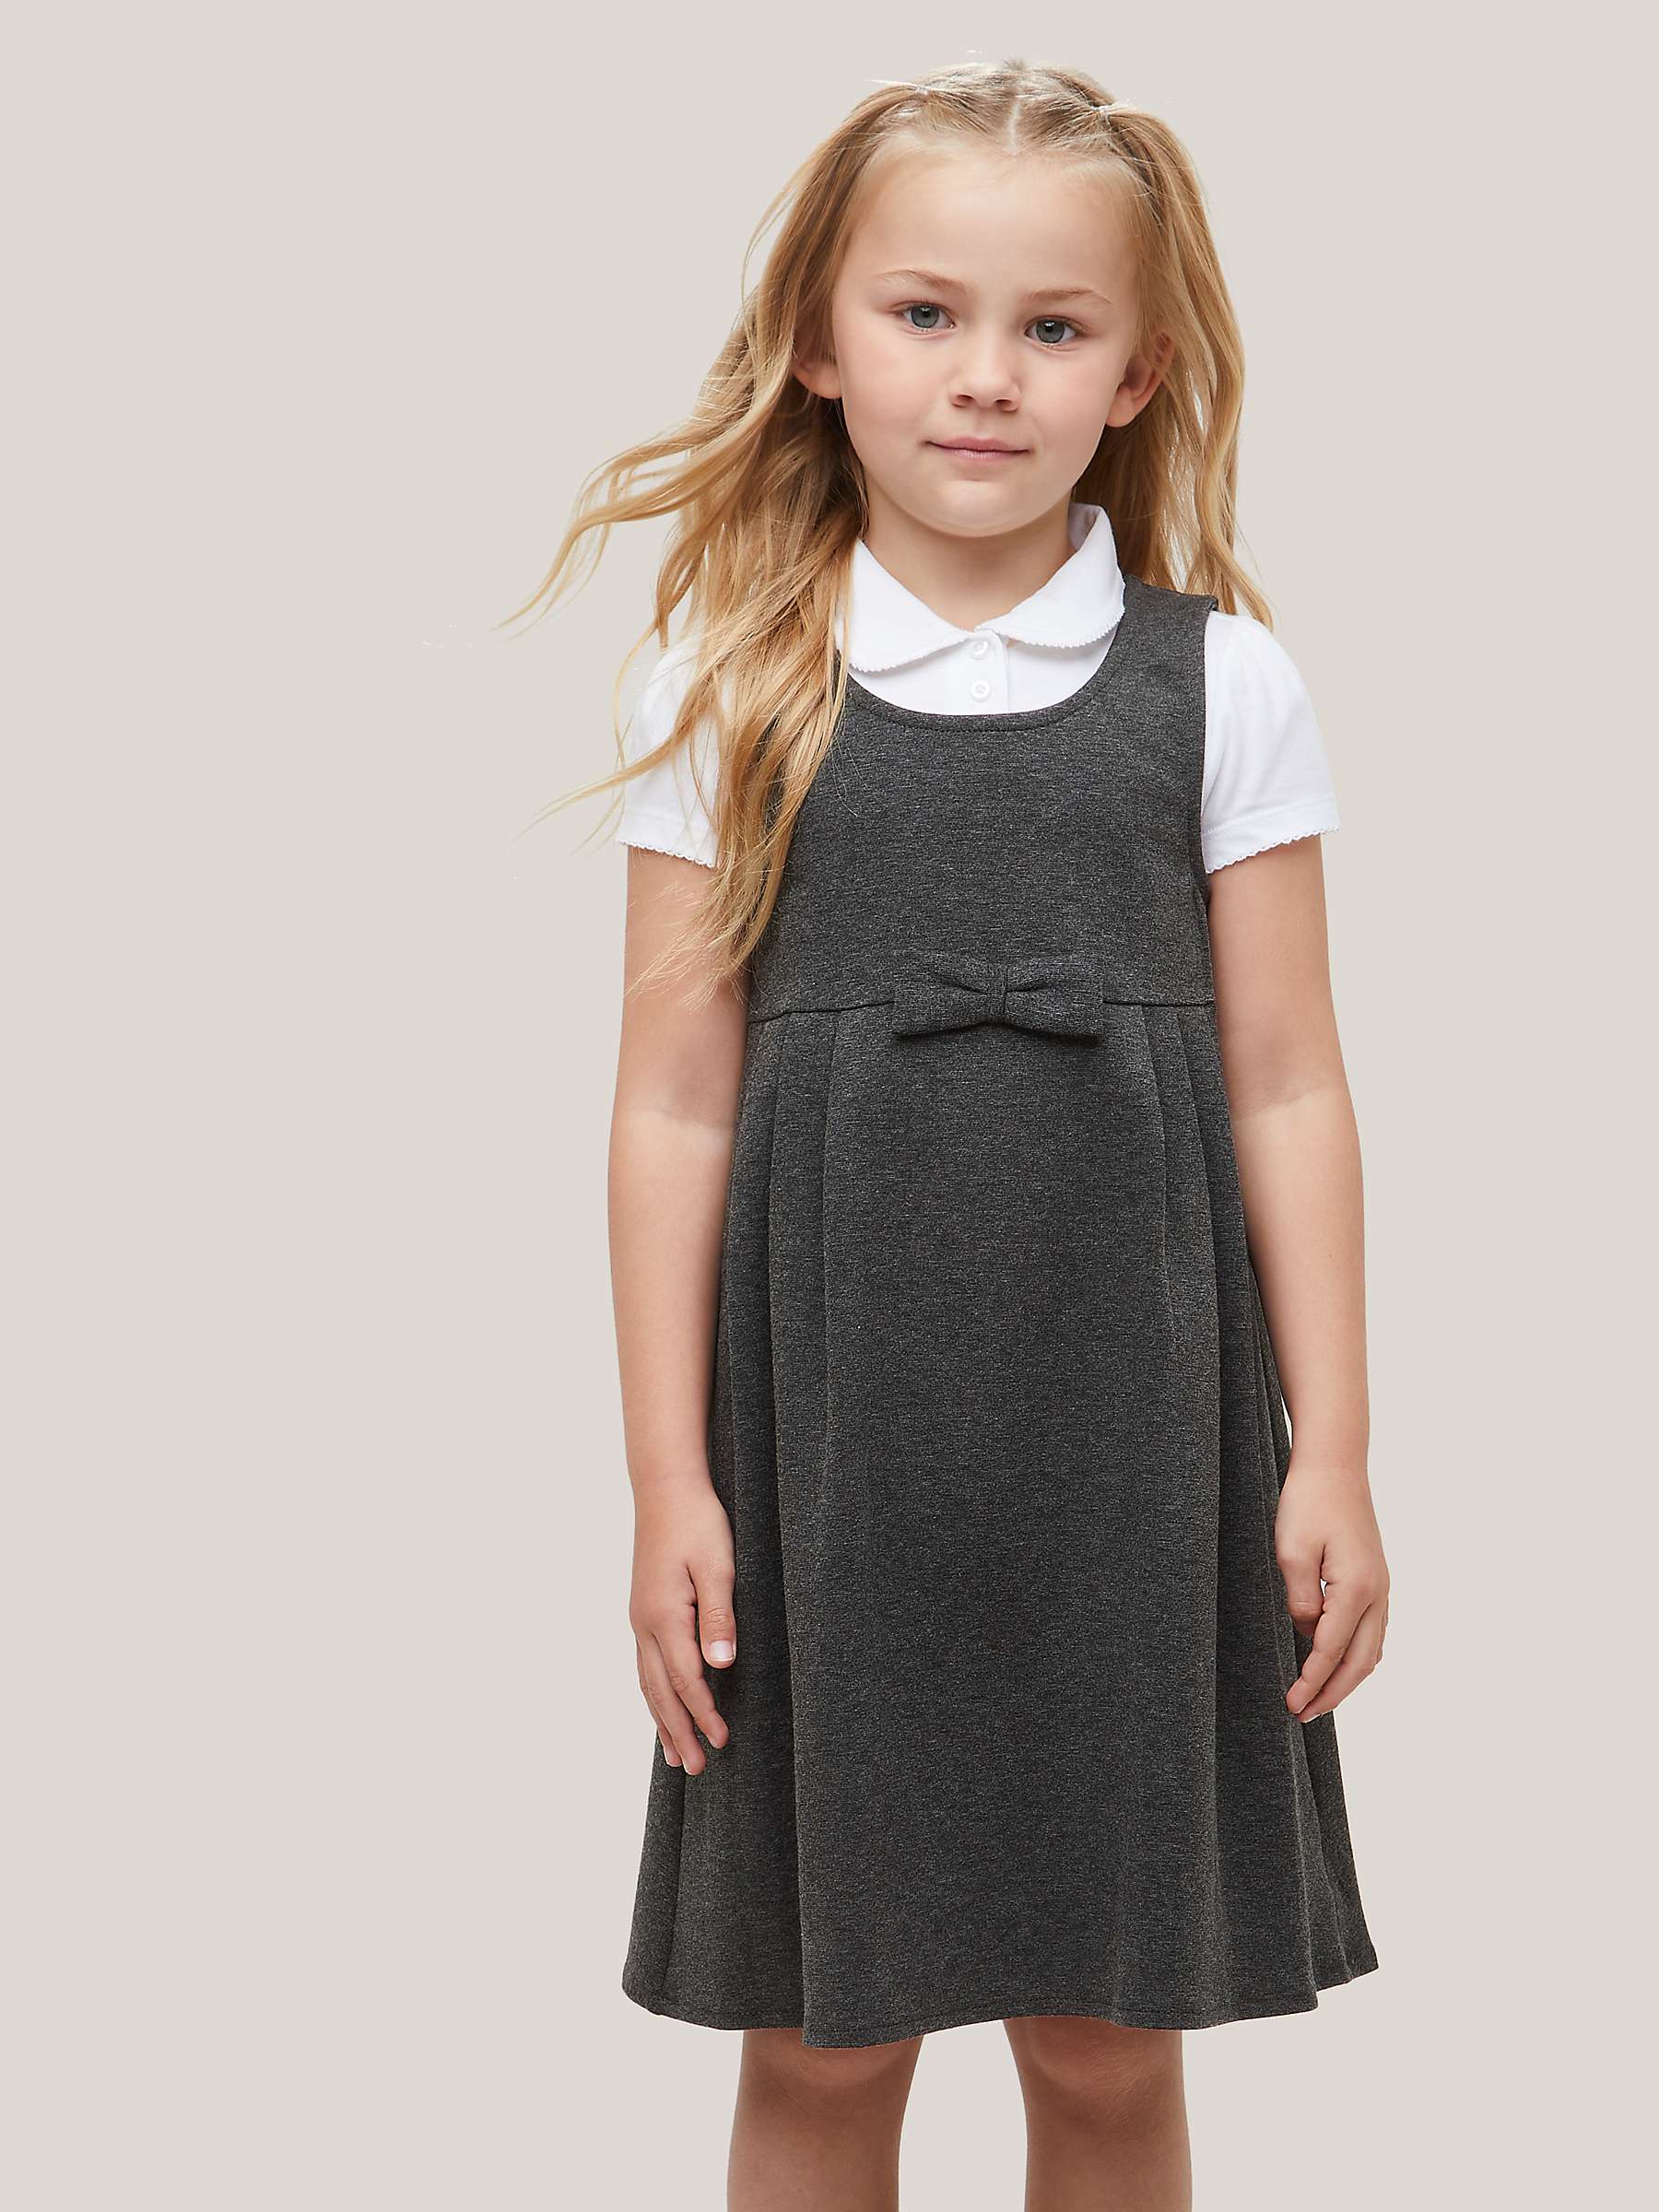 Buy John Lewis Girls' Pleated School Tunic With Bow, Grey Online at johnlewis.com